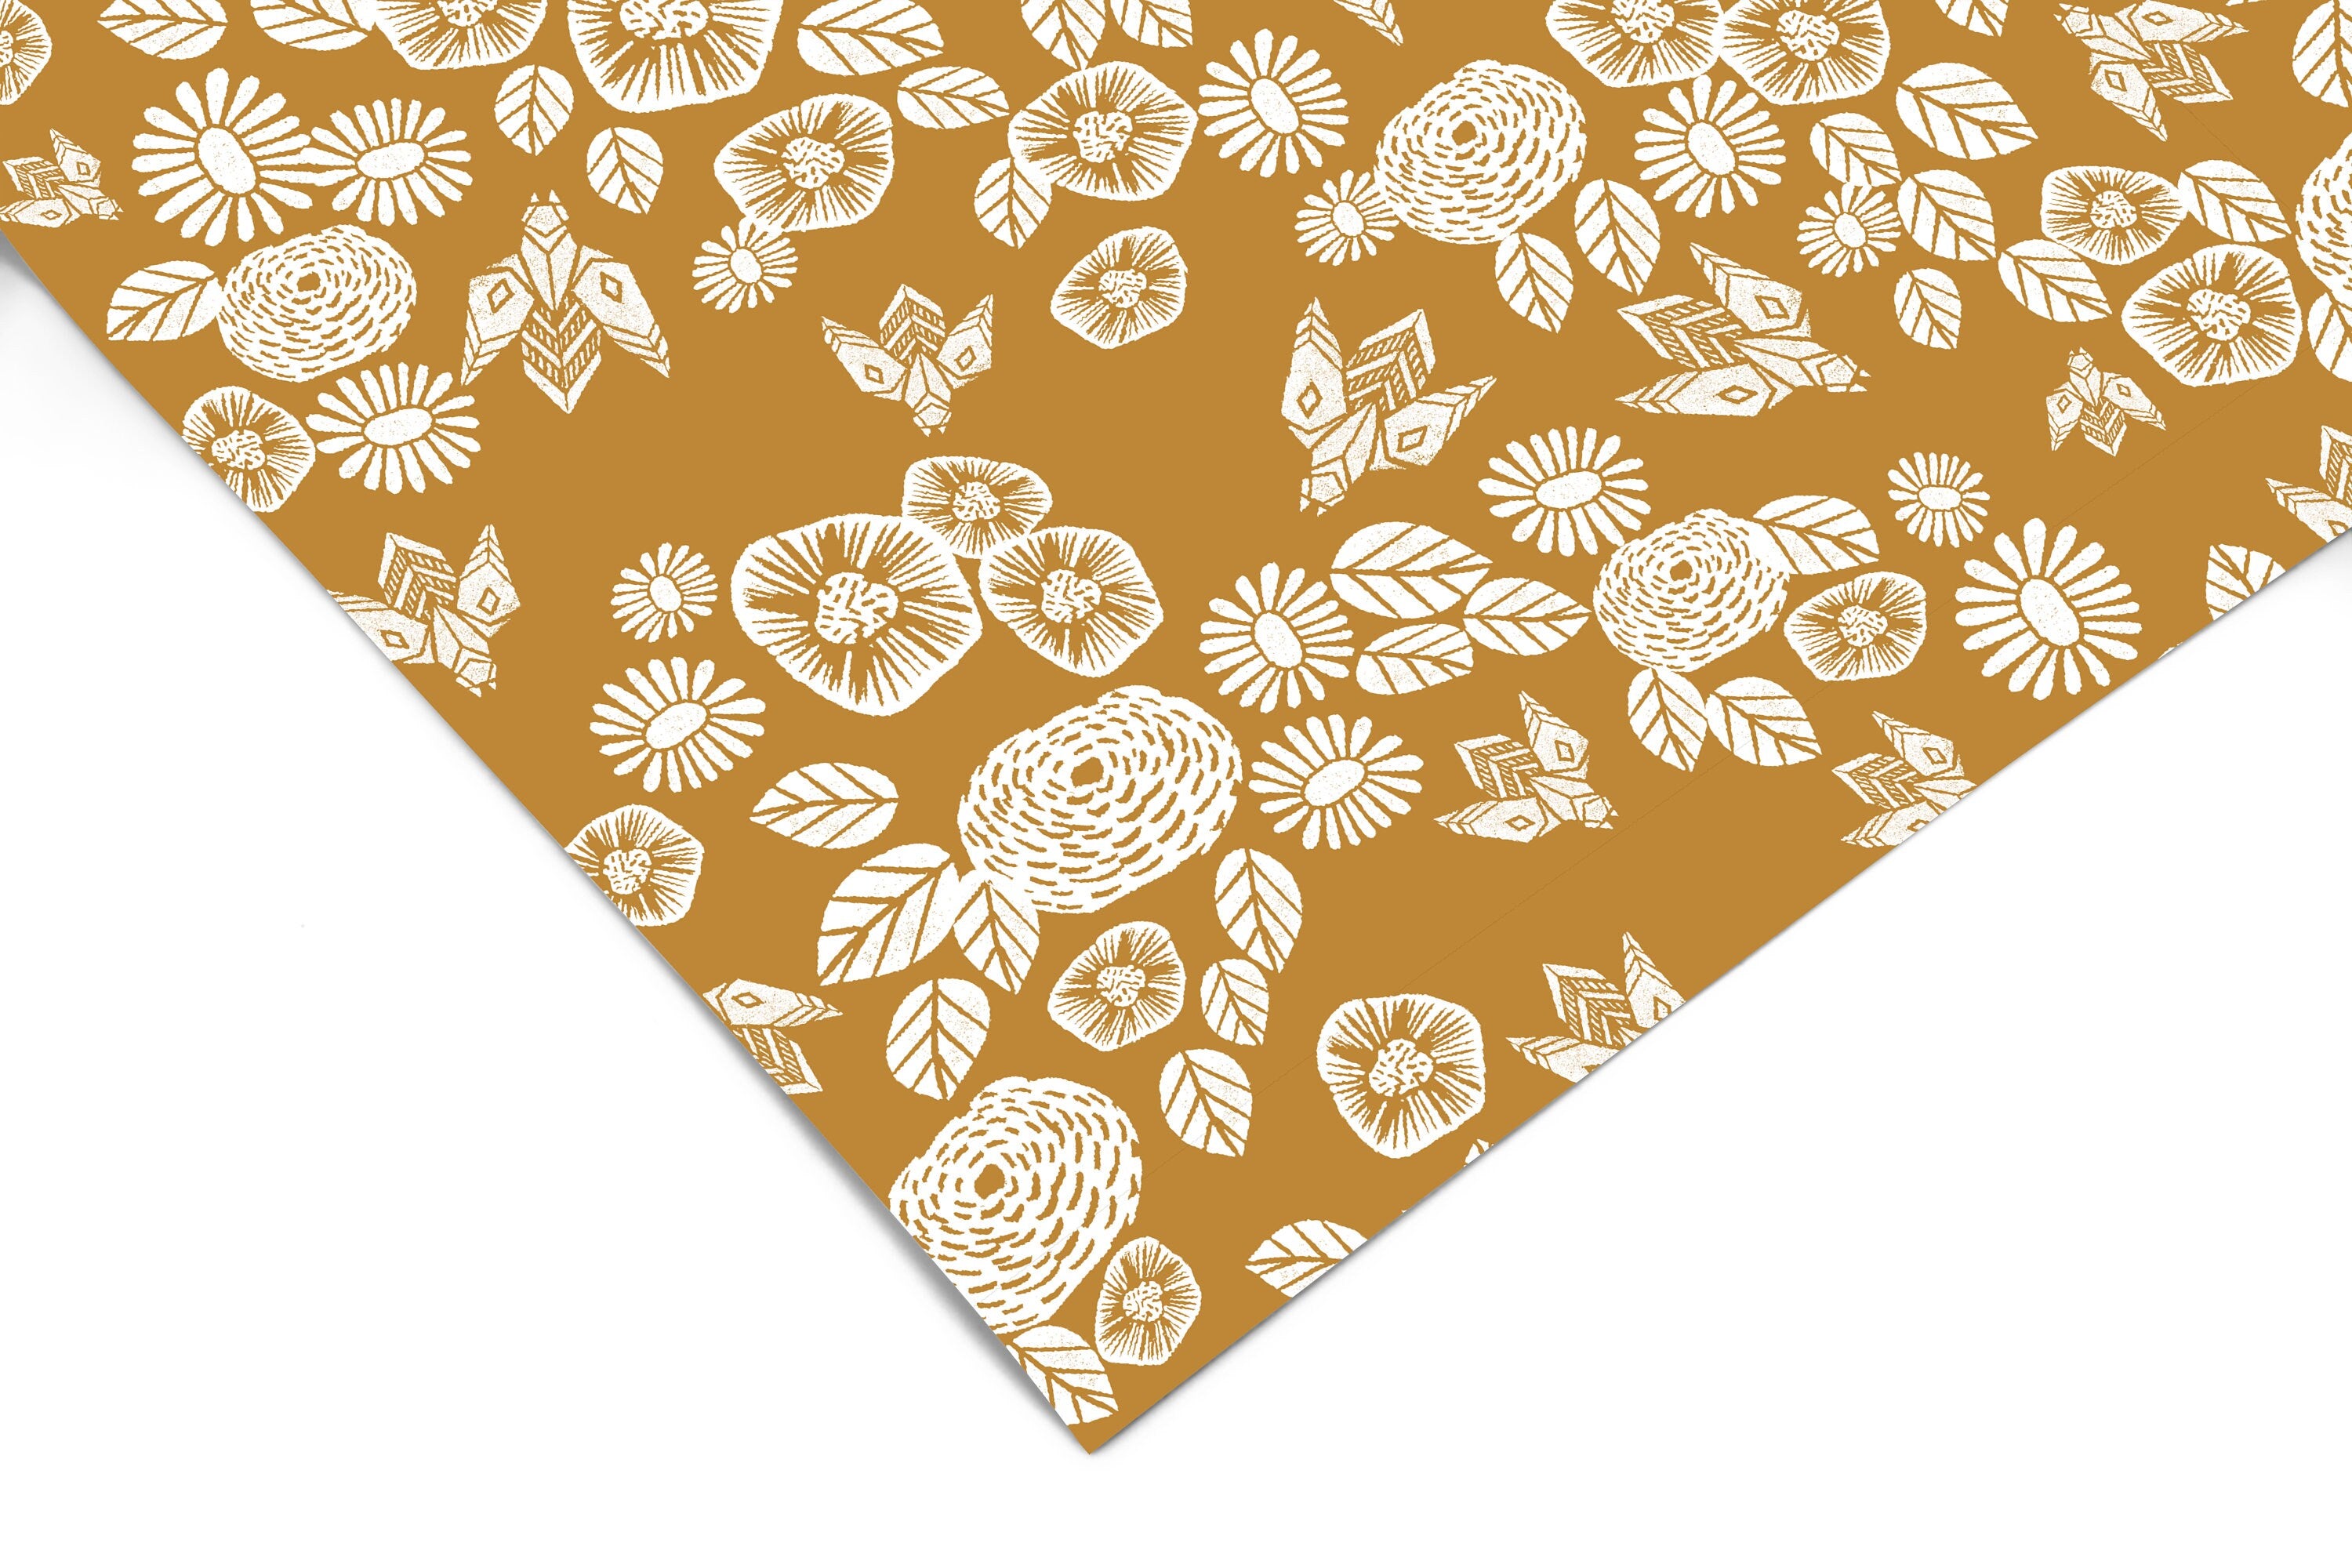 Golden Bees Floral Contact Paper | Peel And Stick Wallpaper | Removable Wallpaper | Shelf Liner | Drawer Liner Peel and Stick Paper 1096